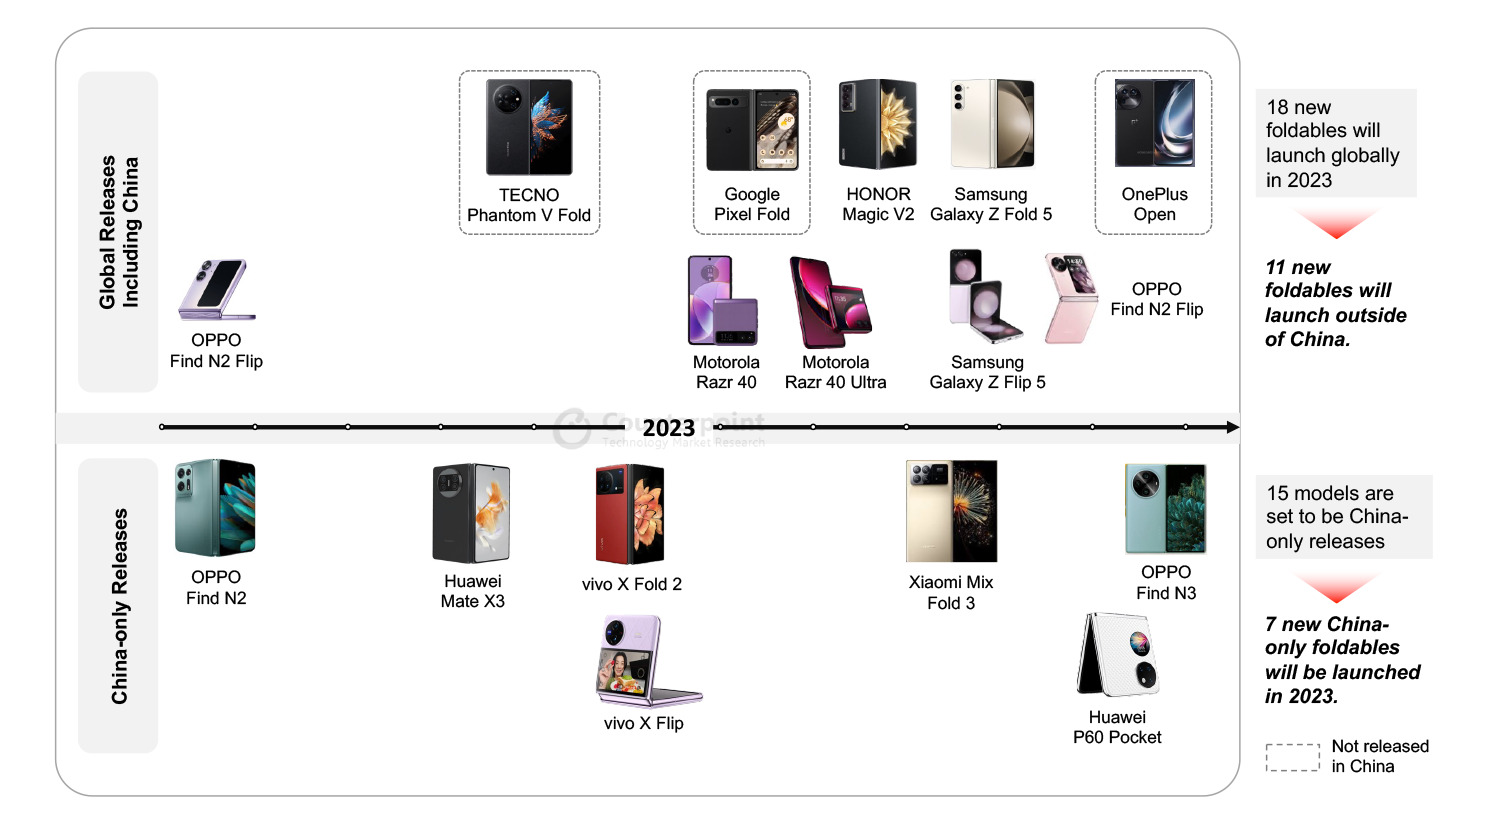 Foldable Product Launch Status in 2023 Comparison of Global and Chinese Foldable Markets